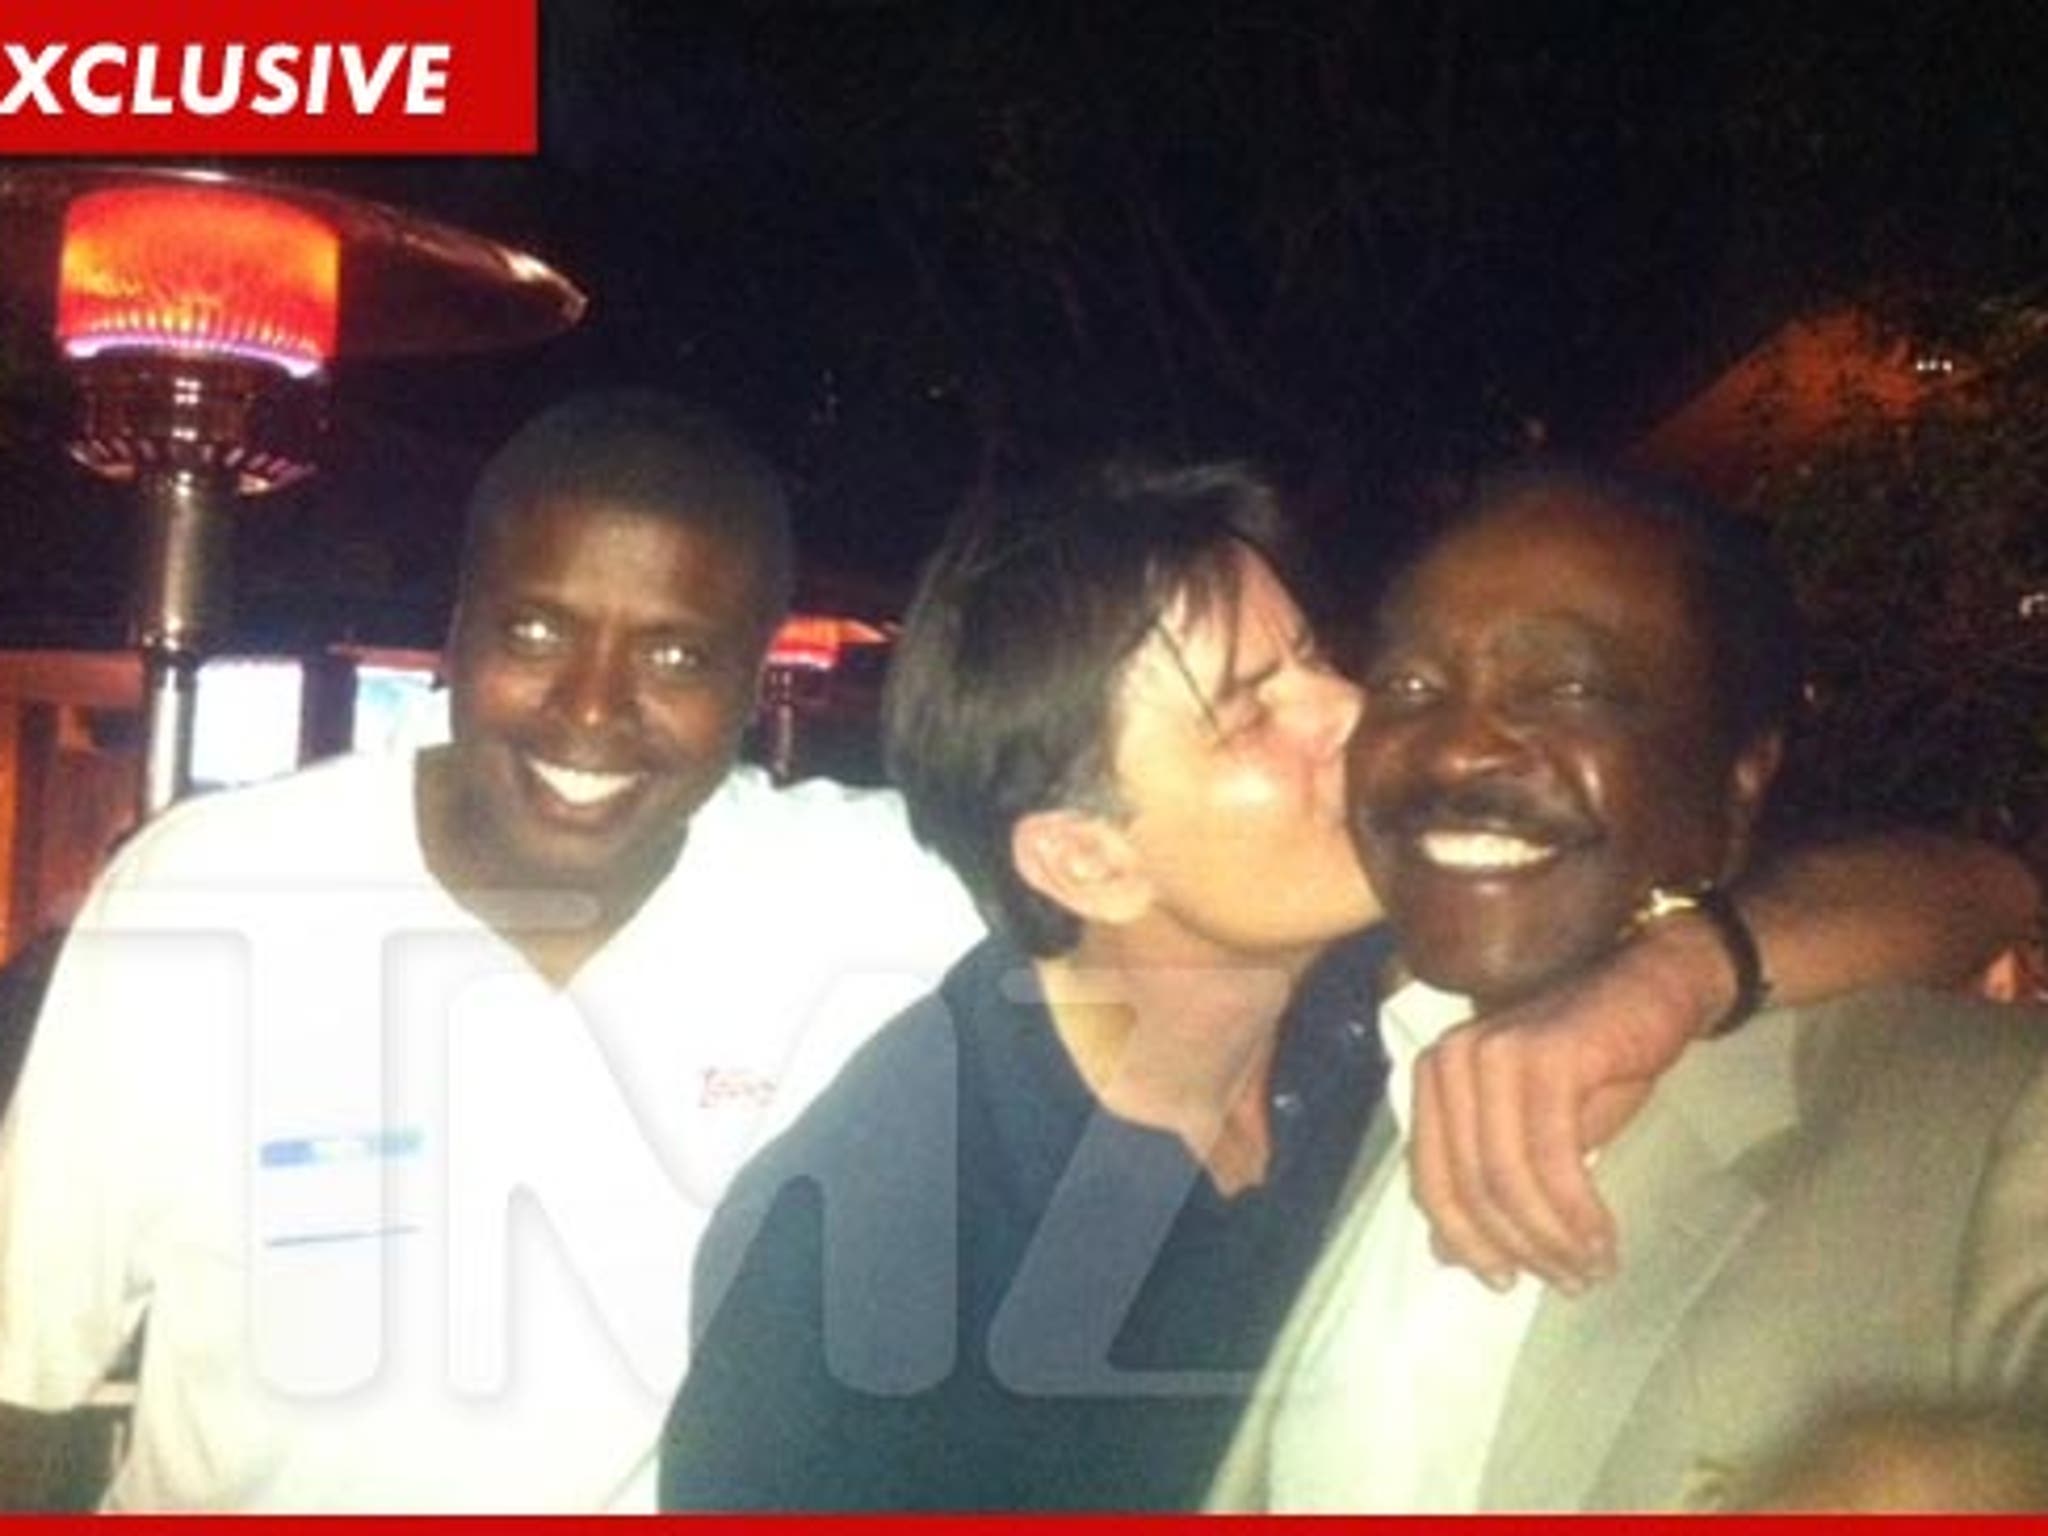 Charlie Sheen's 'Married' -- Parties with MLB Legends